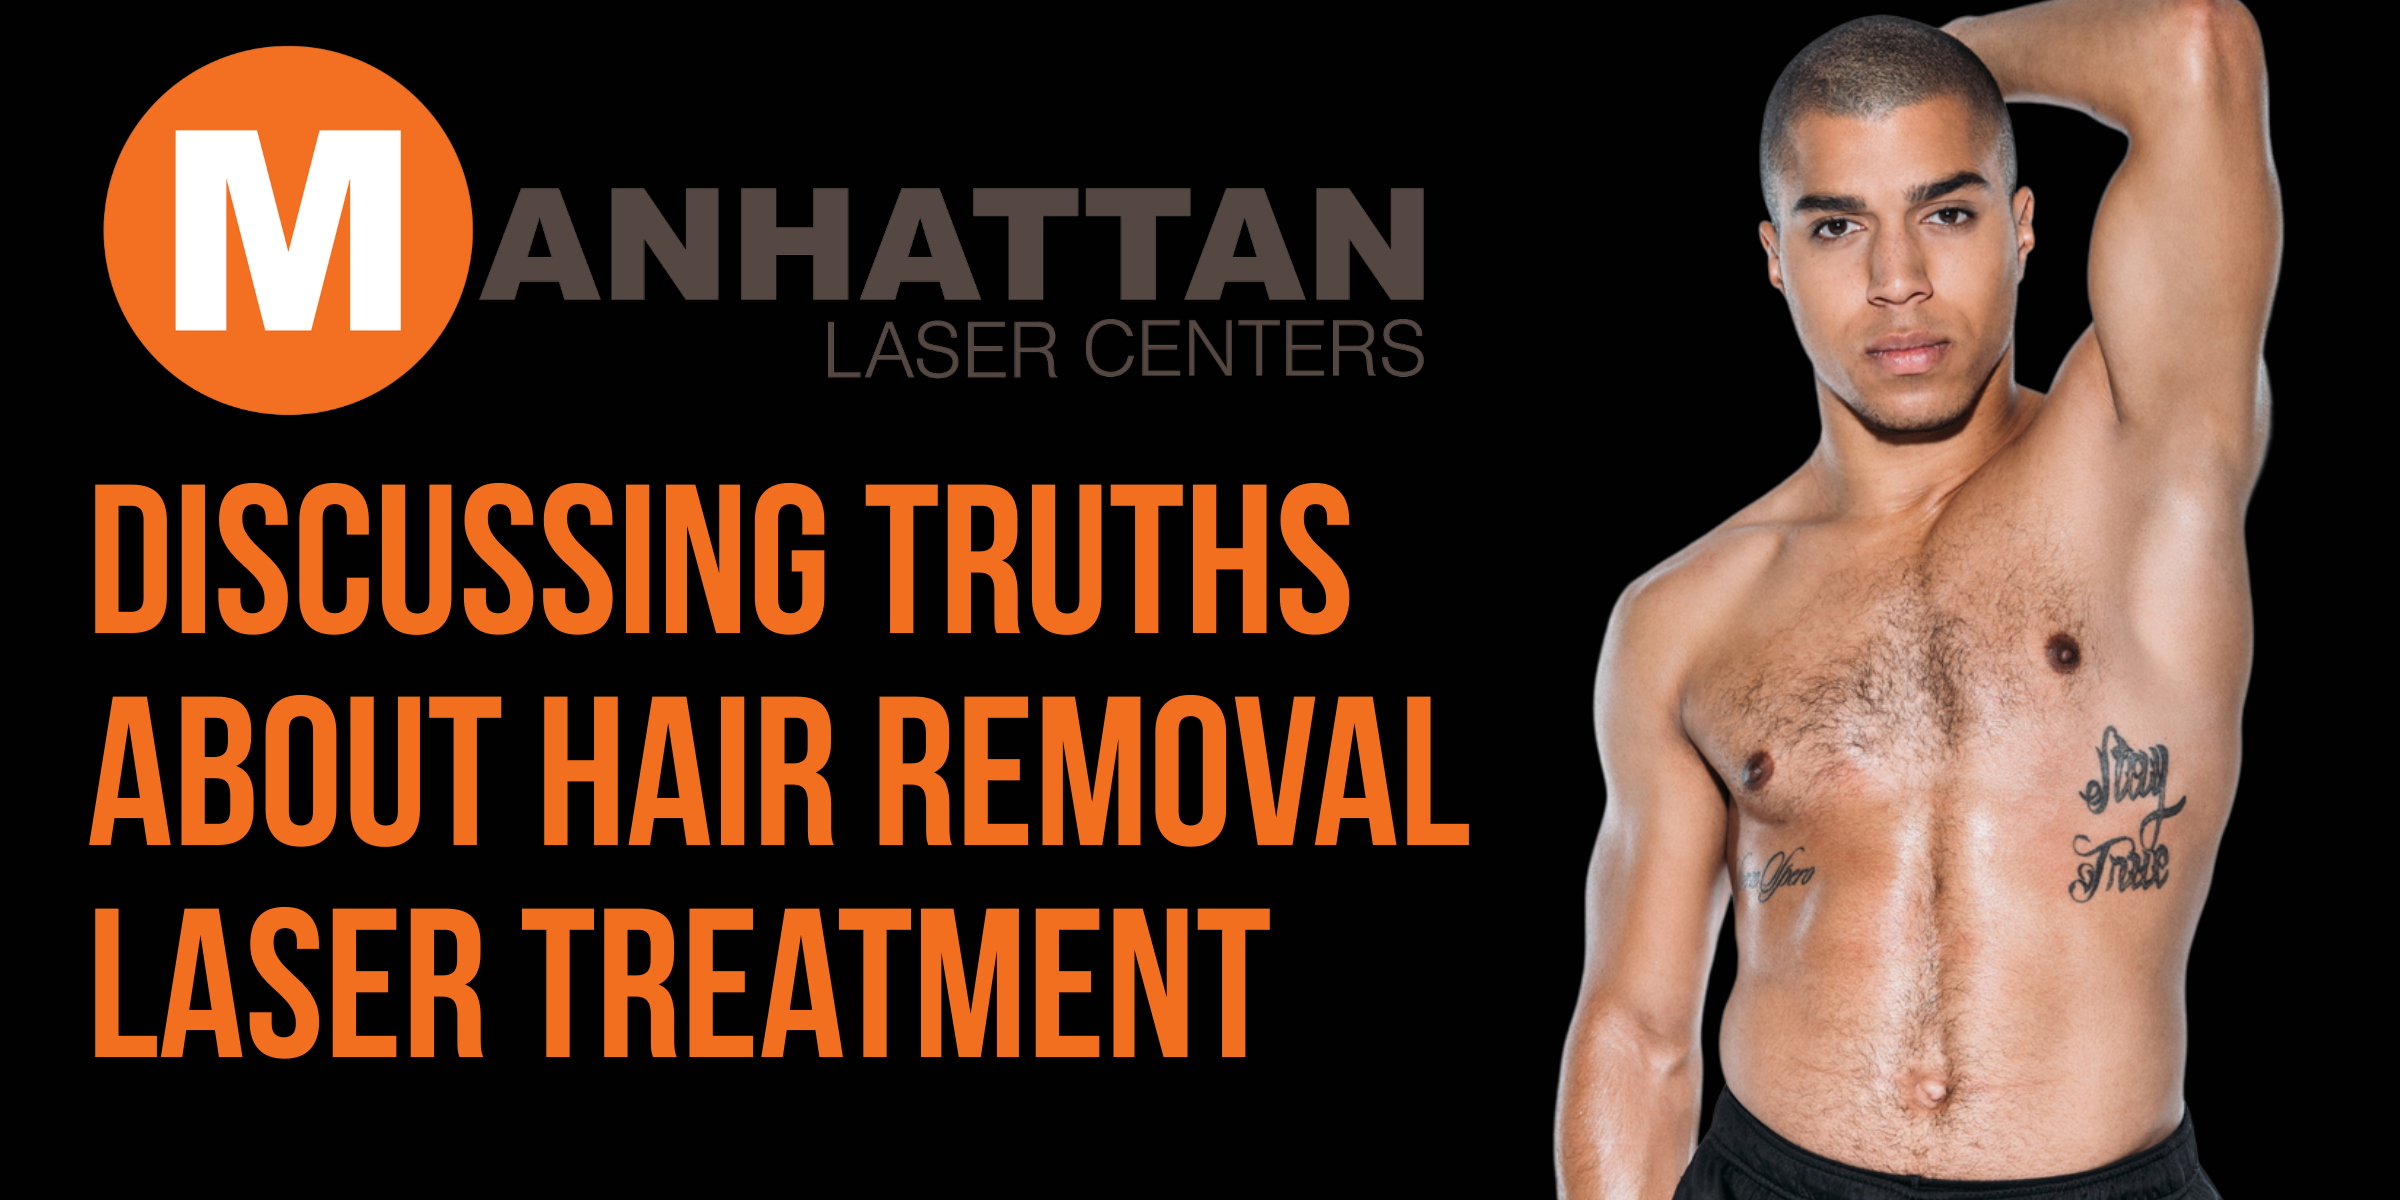 Discussing Truths About Hair Removal Laser Treatment